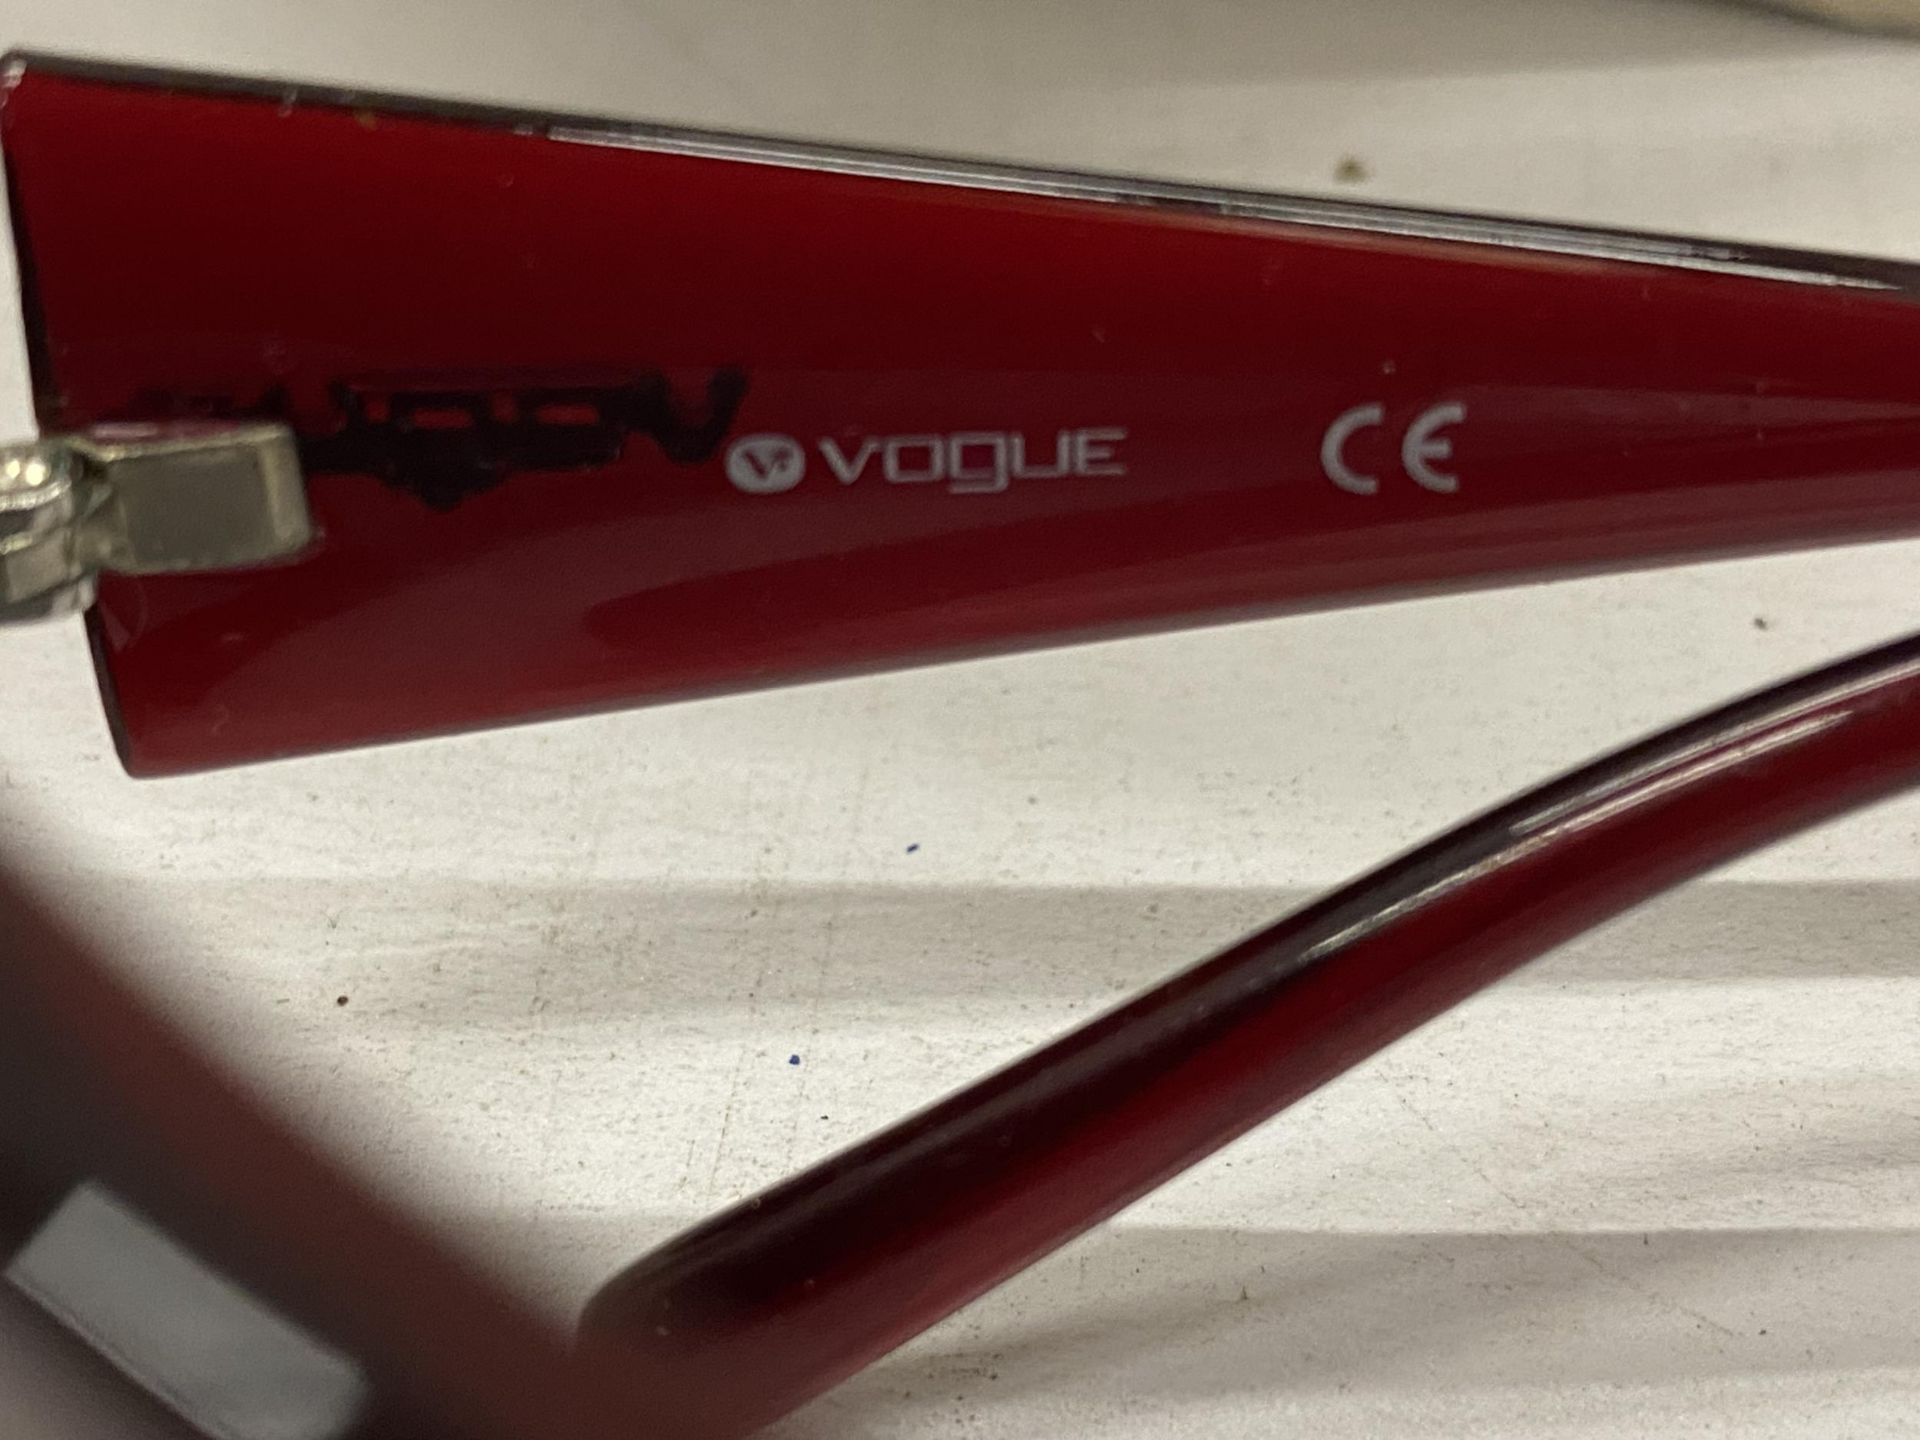 A PAIR OF VOGUE SUNGLASSES WITH CASE - Image 3 of 4